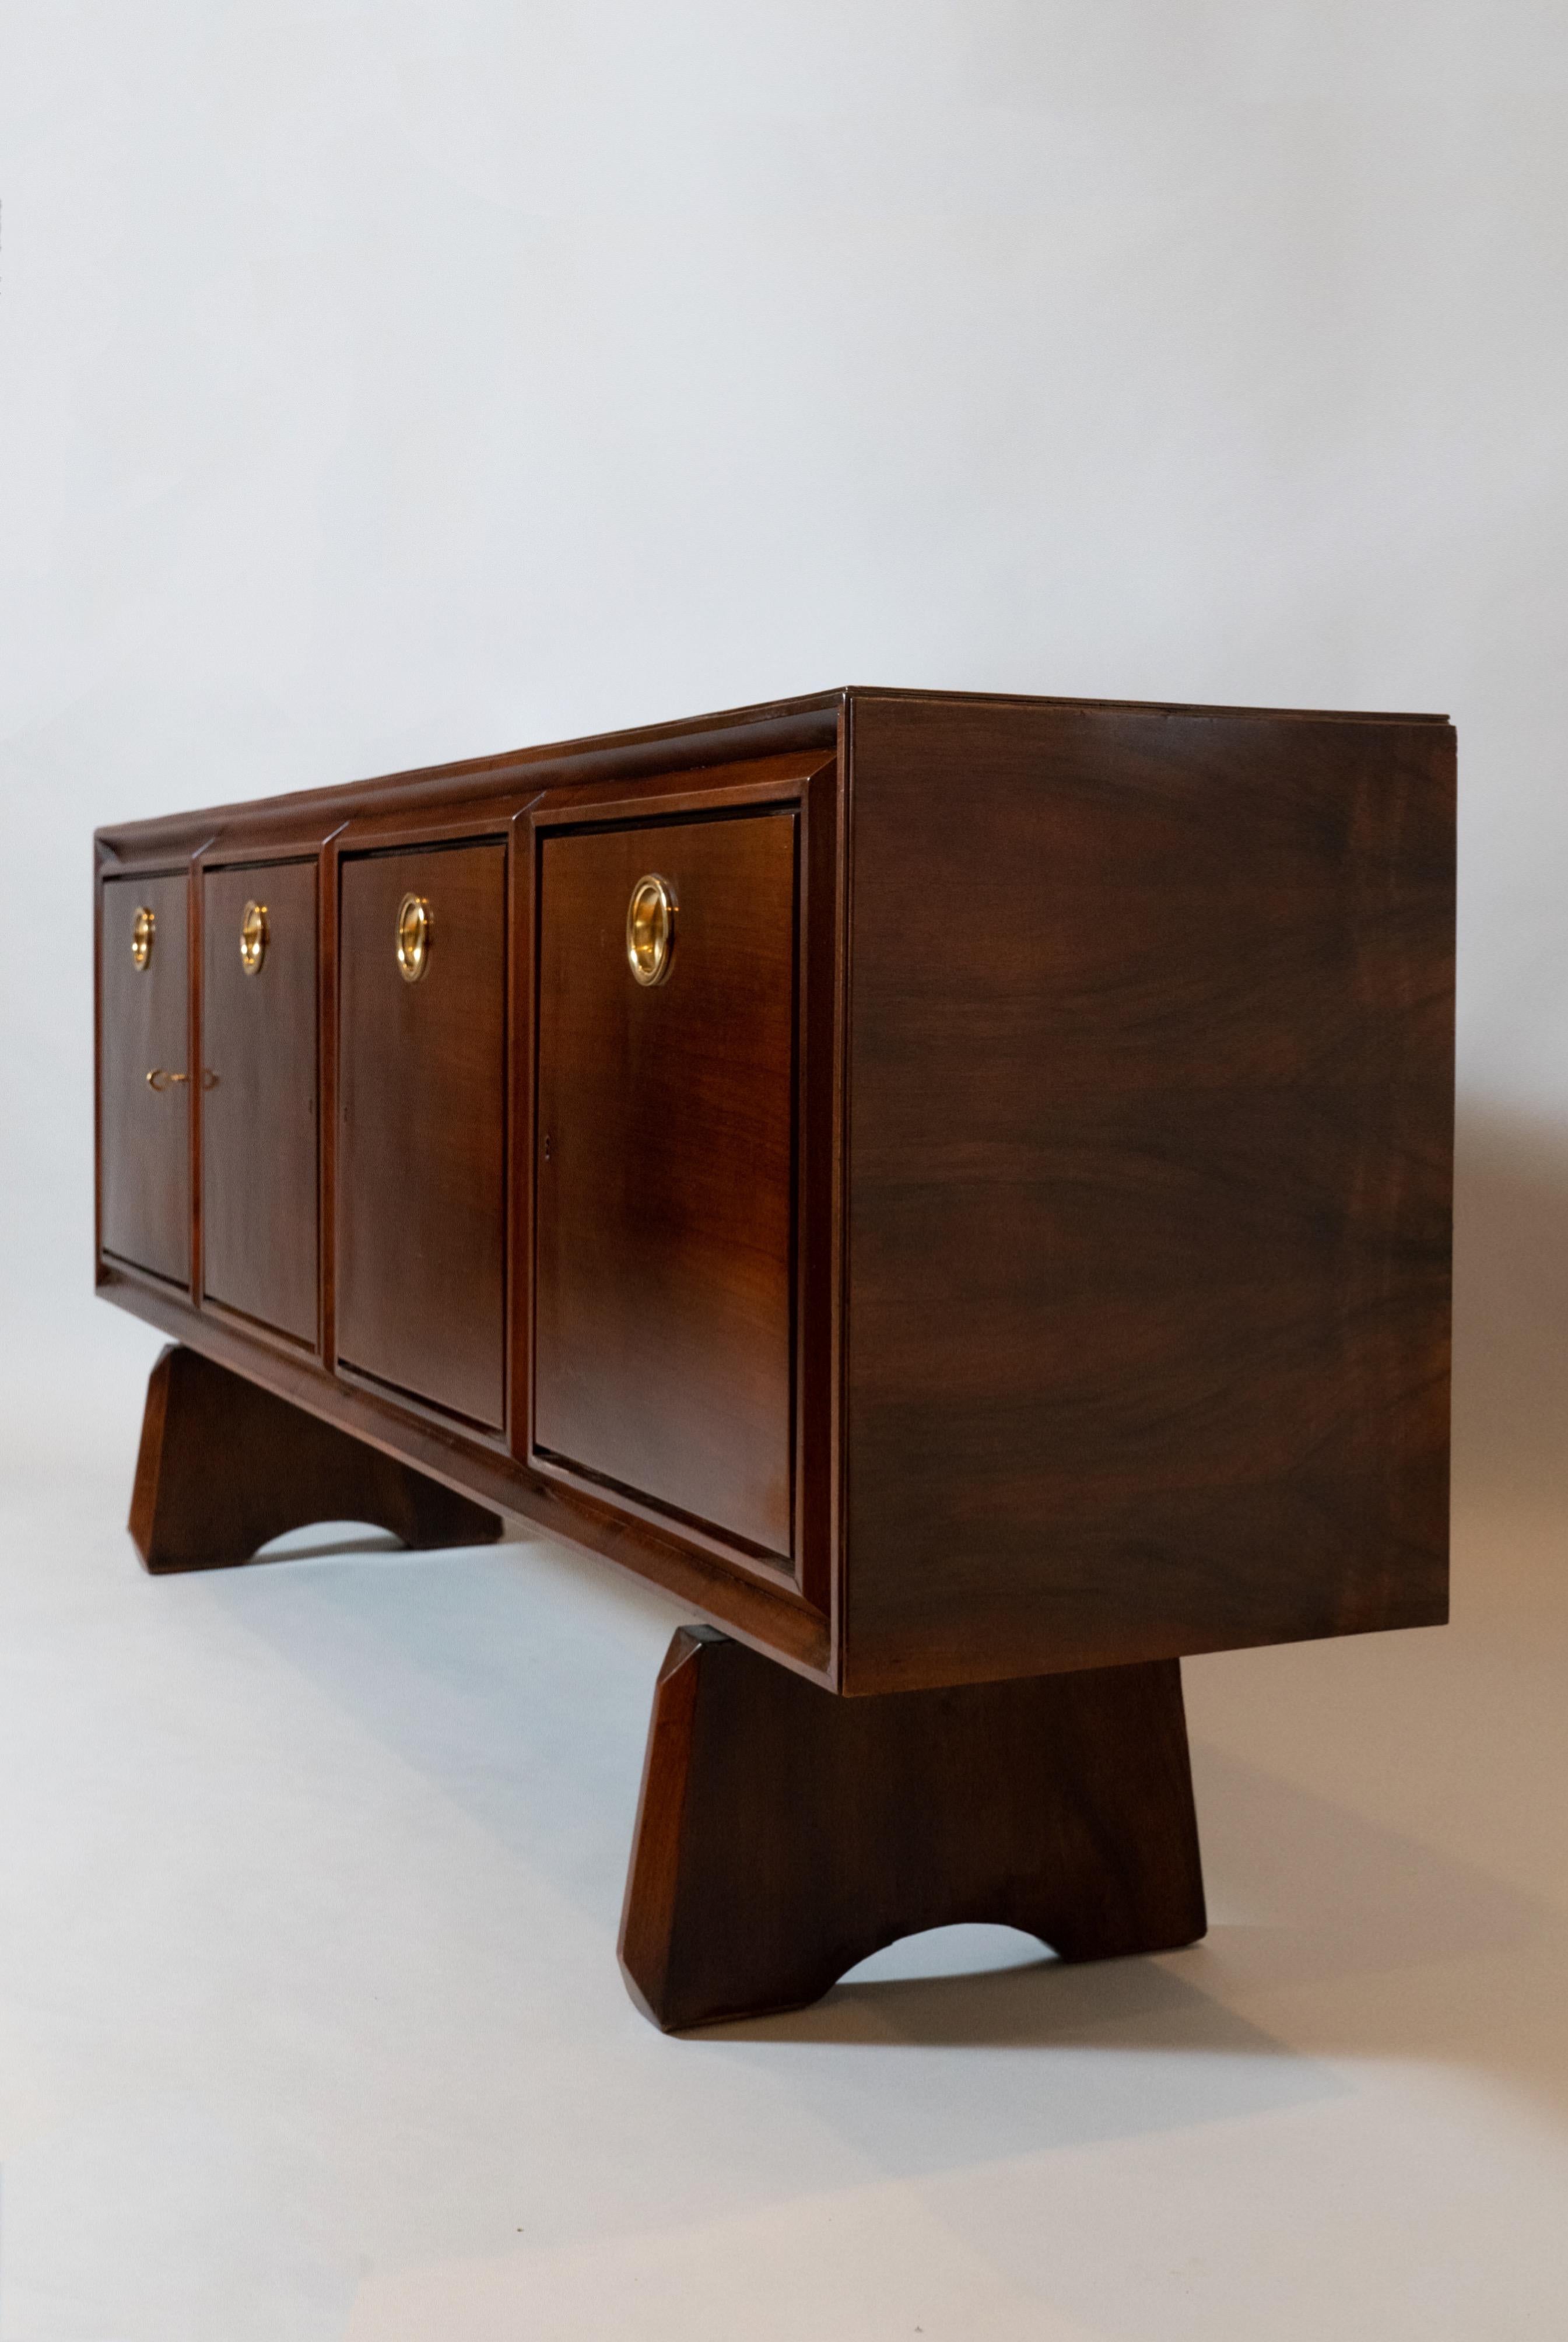 Paolo Buffa: Imposing Four-Door Cabinet in Walnut and Polished Brass, Italy 1950 For Sale 4